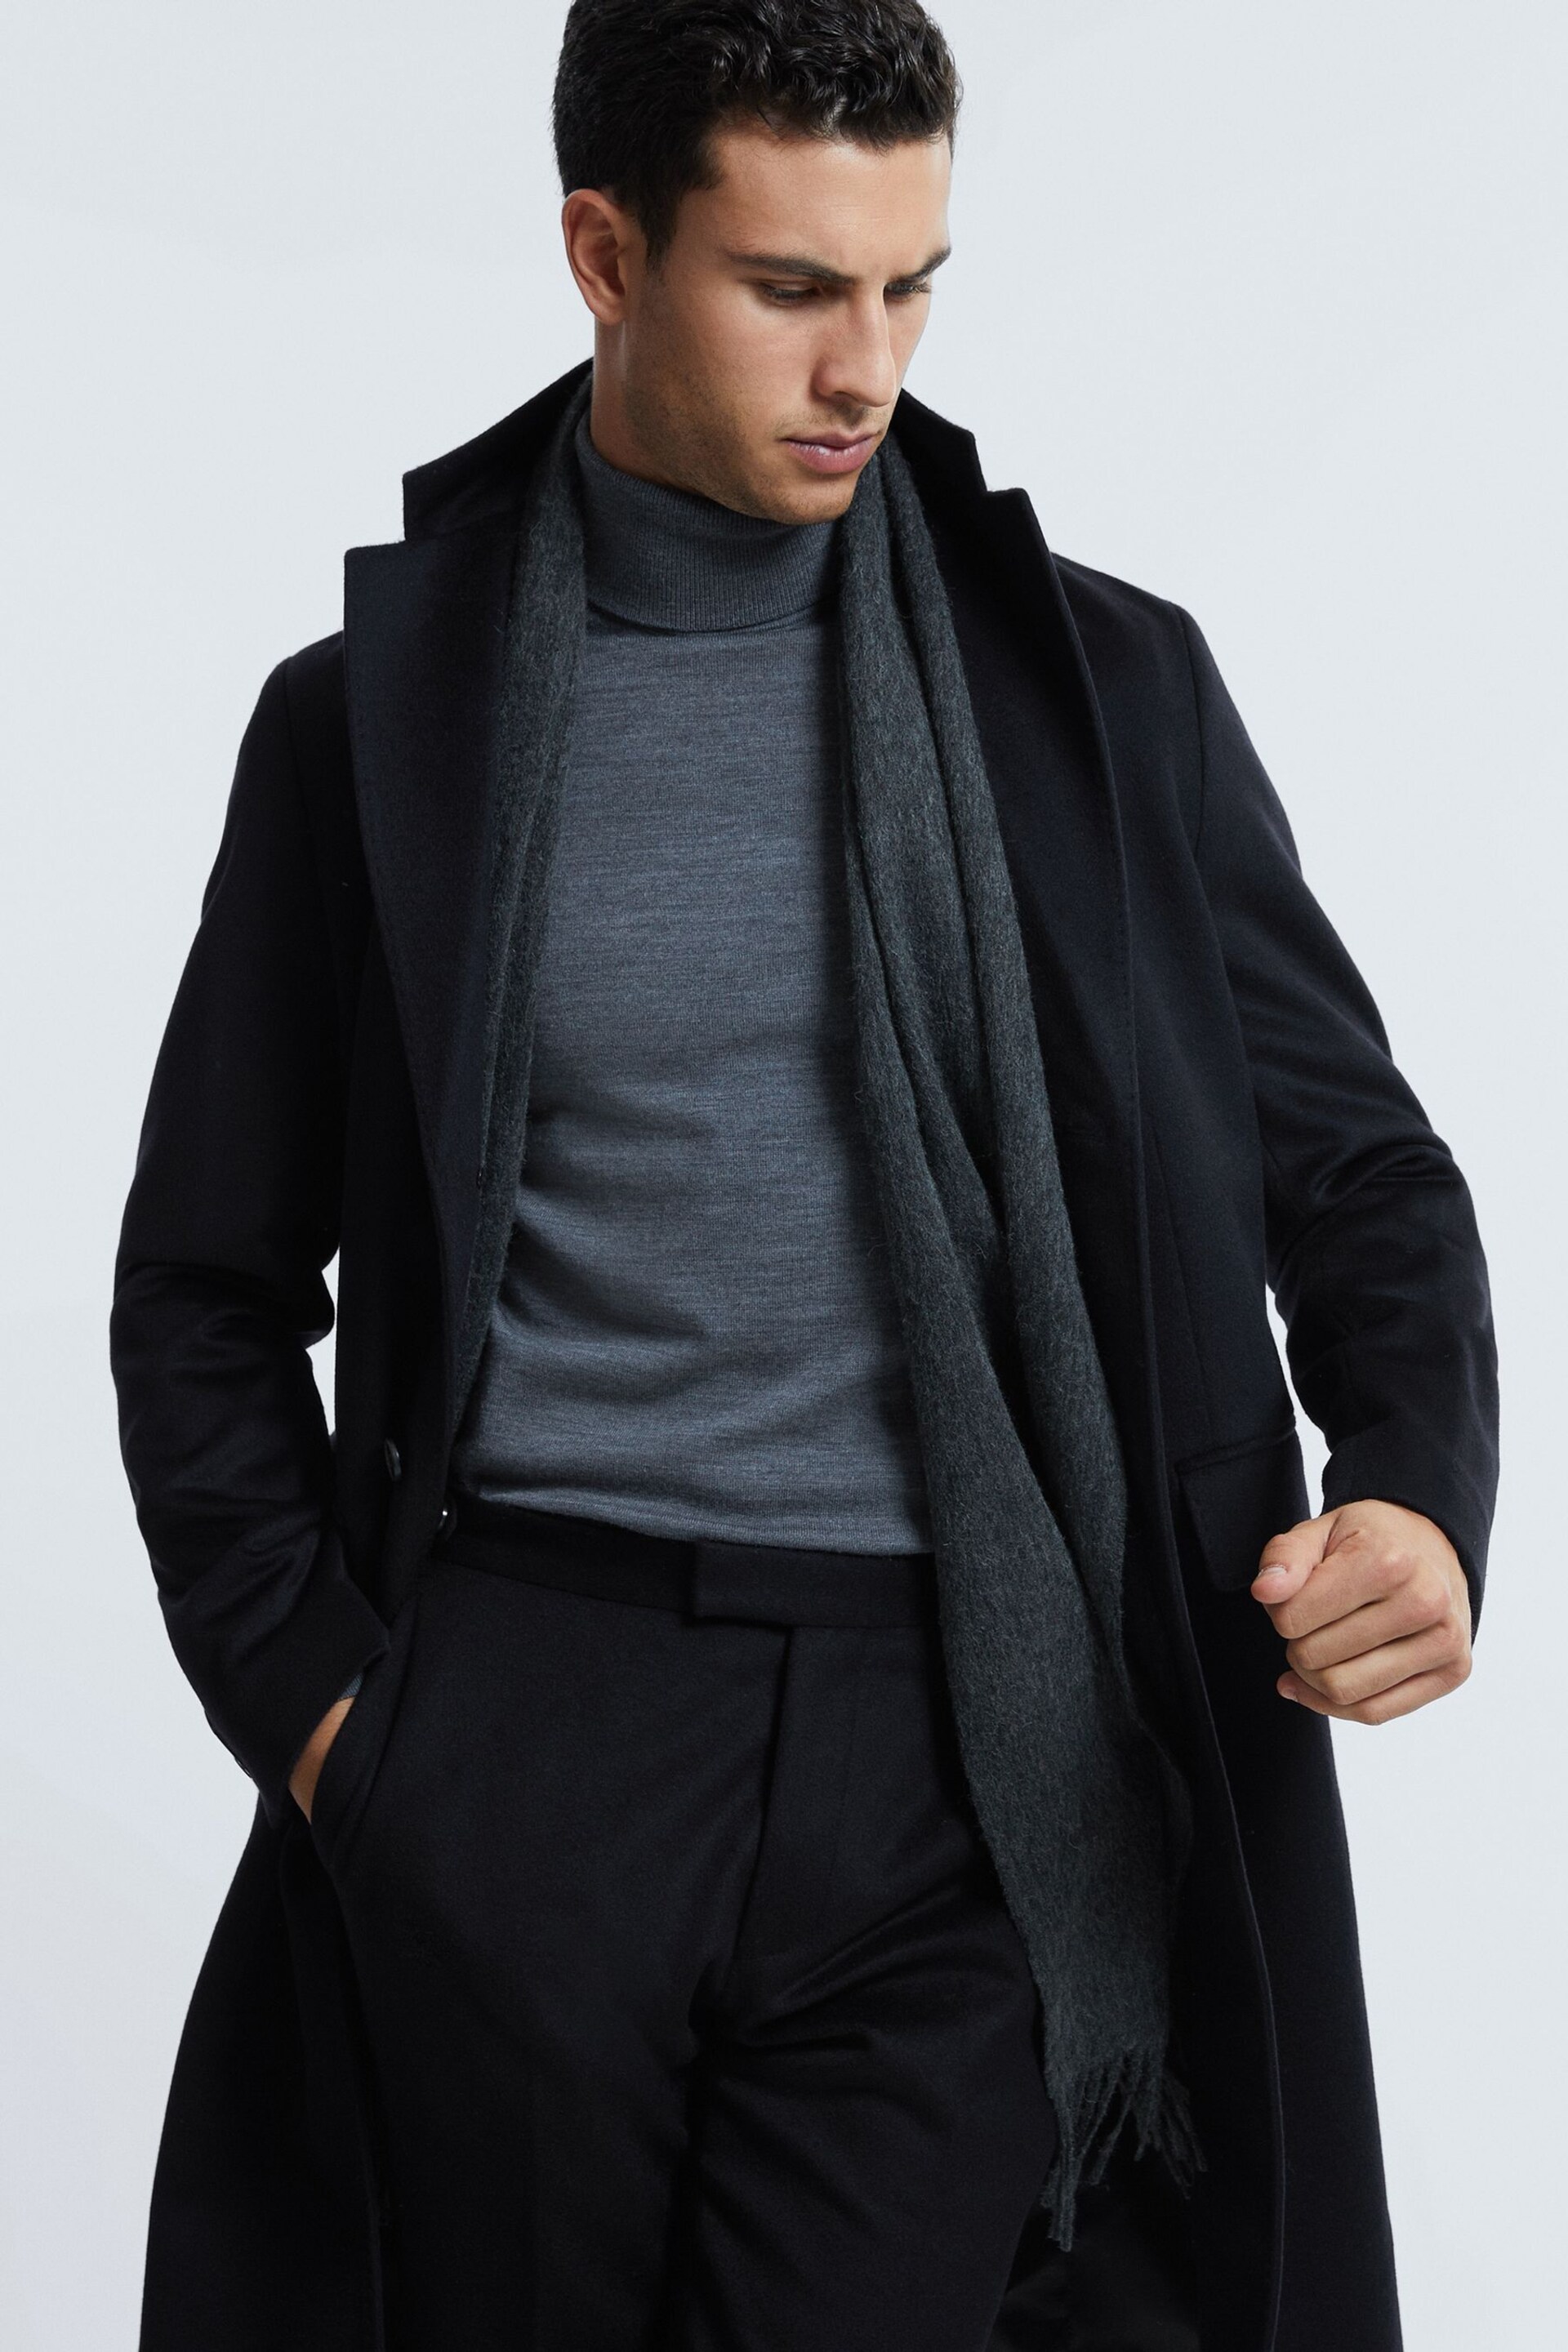 Reiss Navy Tycho Atelier Cashmere Single Breasted Coat - Image 6 of 8